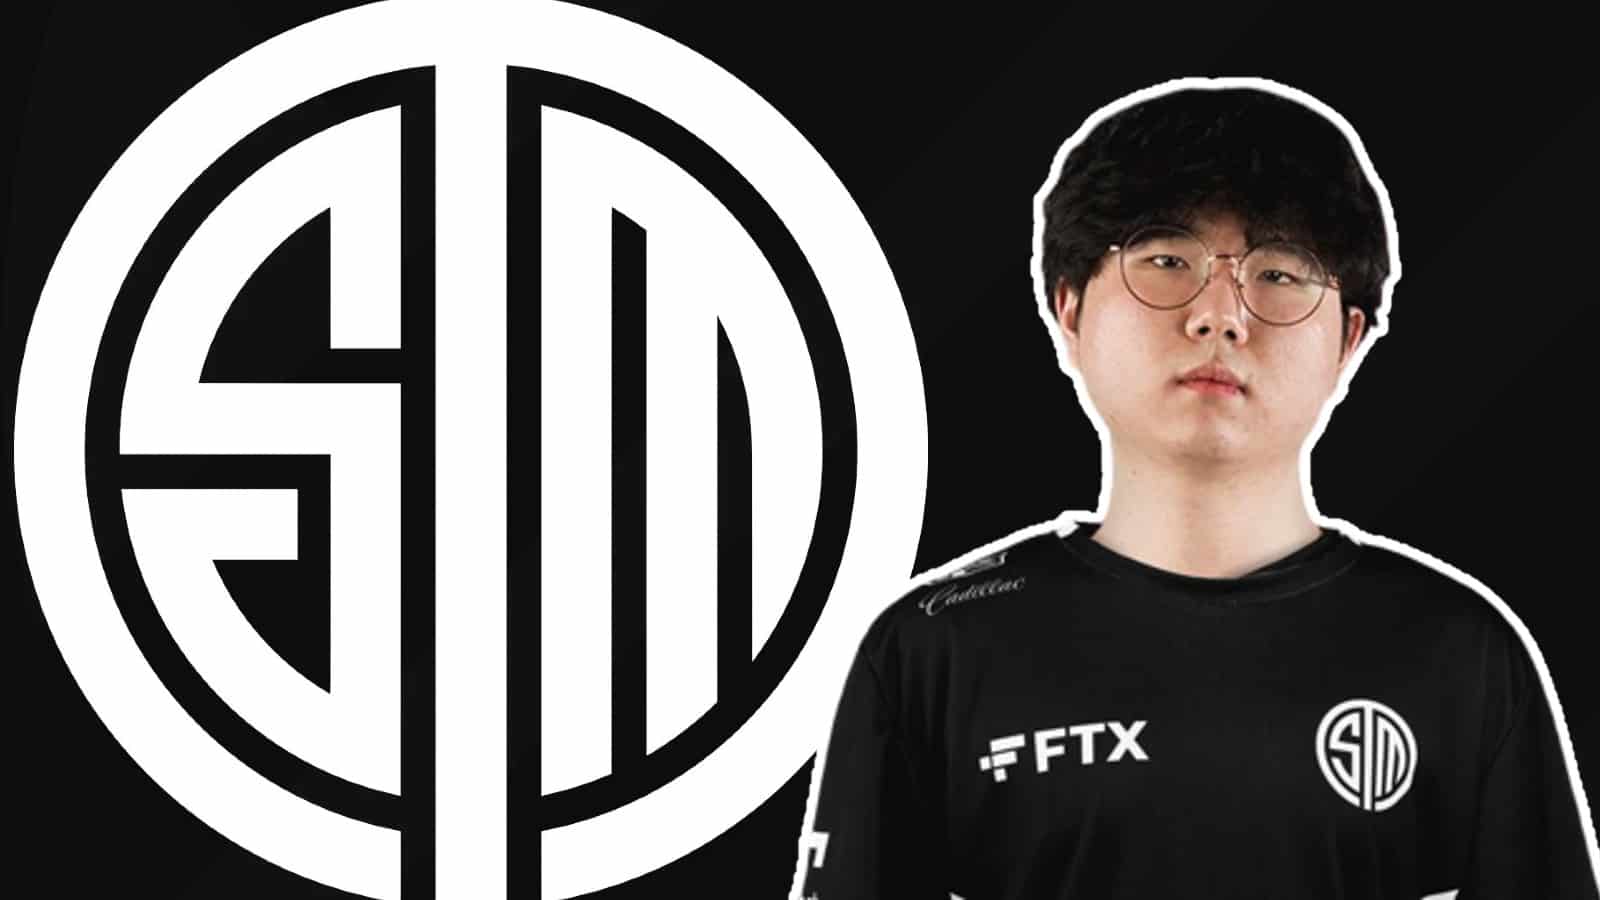 TSM Mia joins the starting lineup